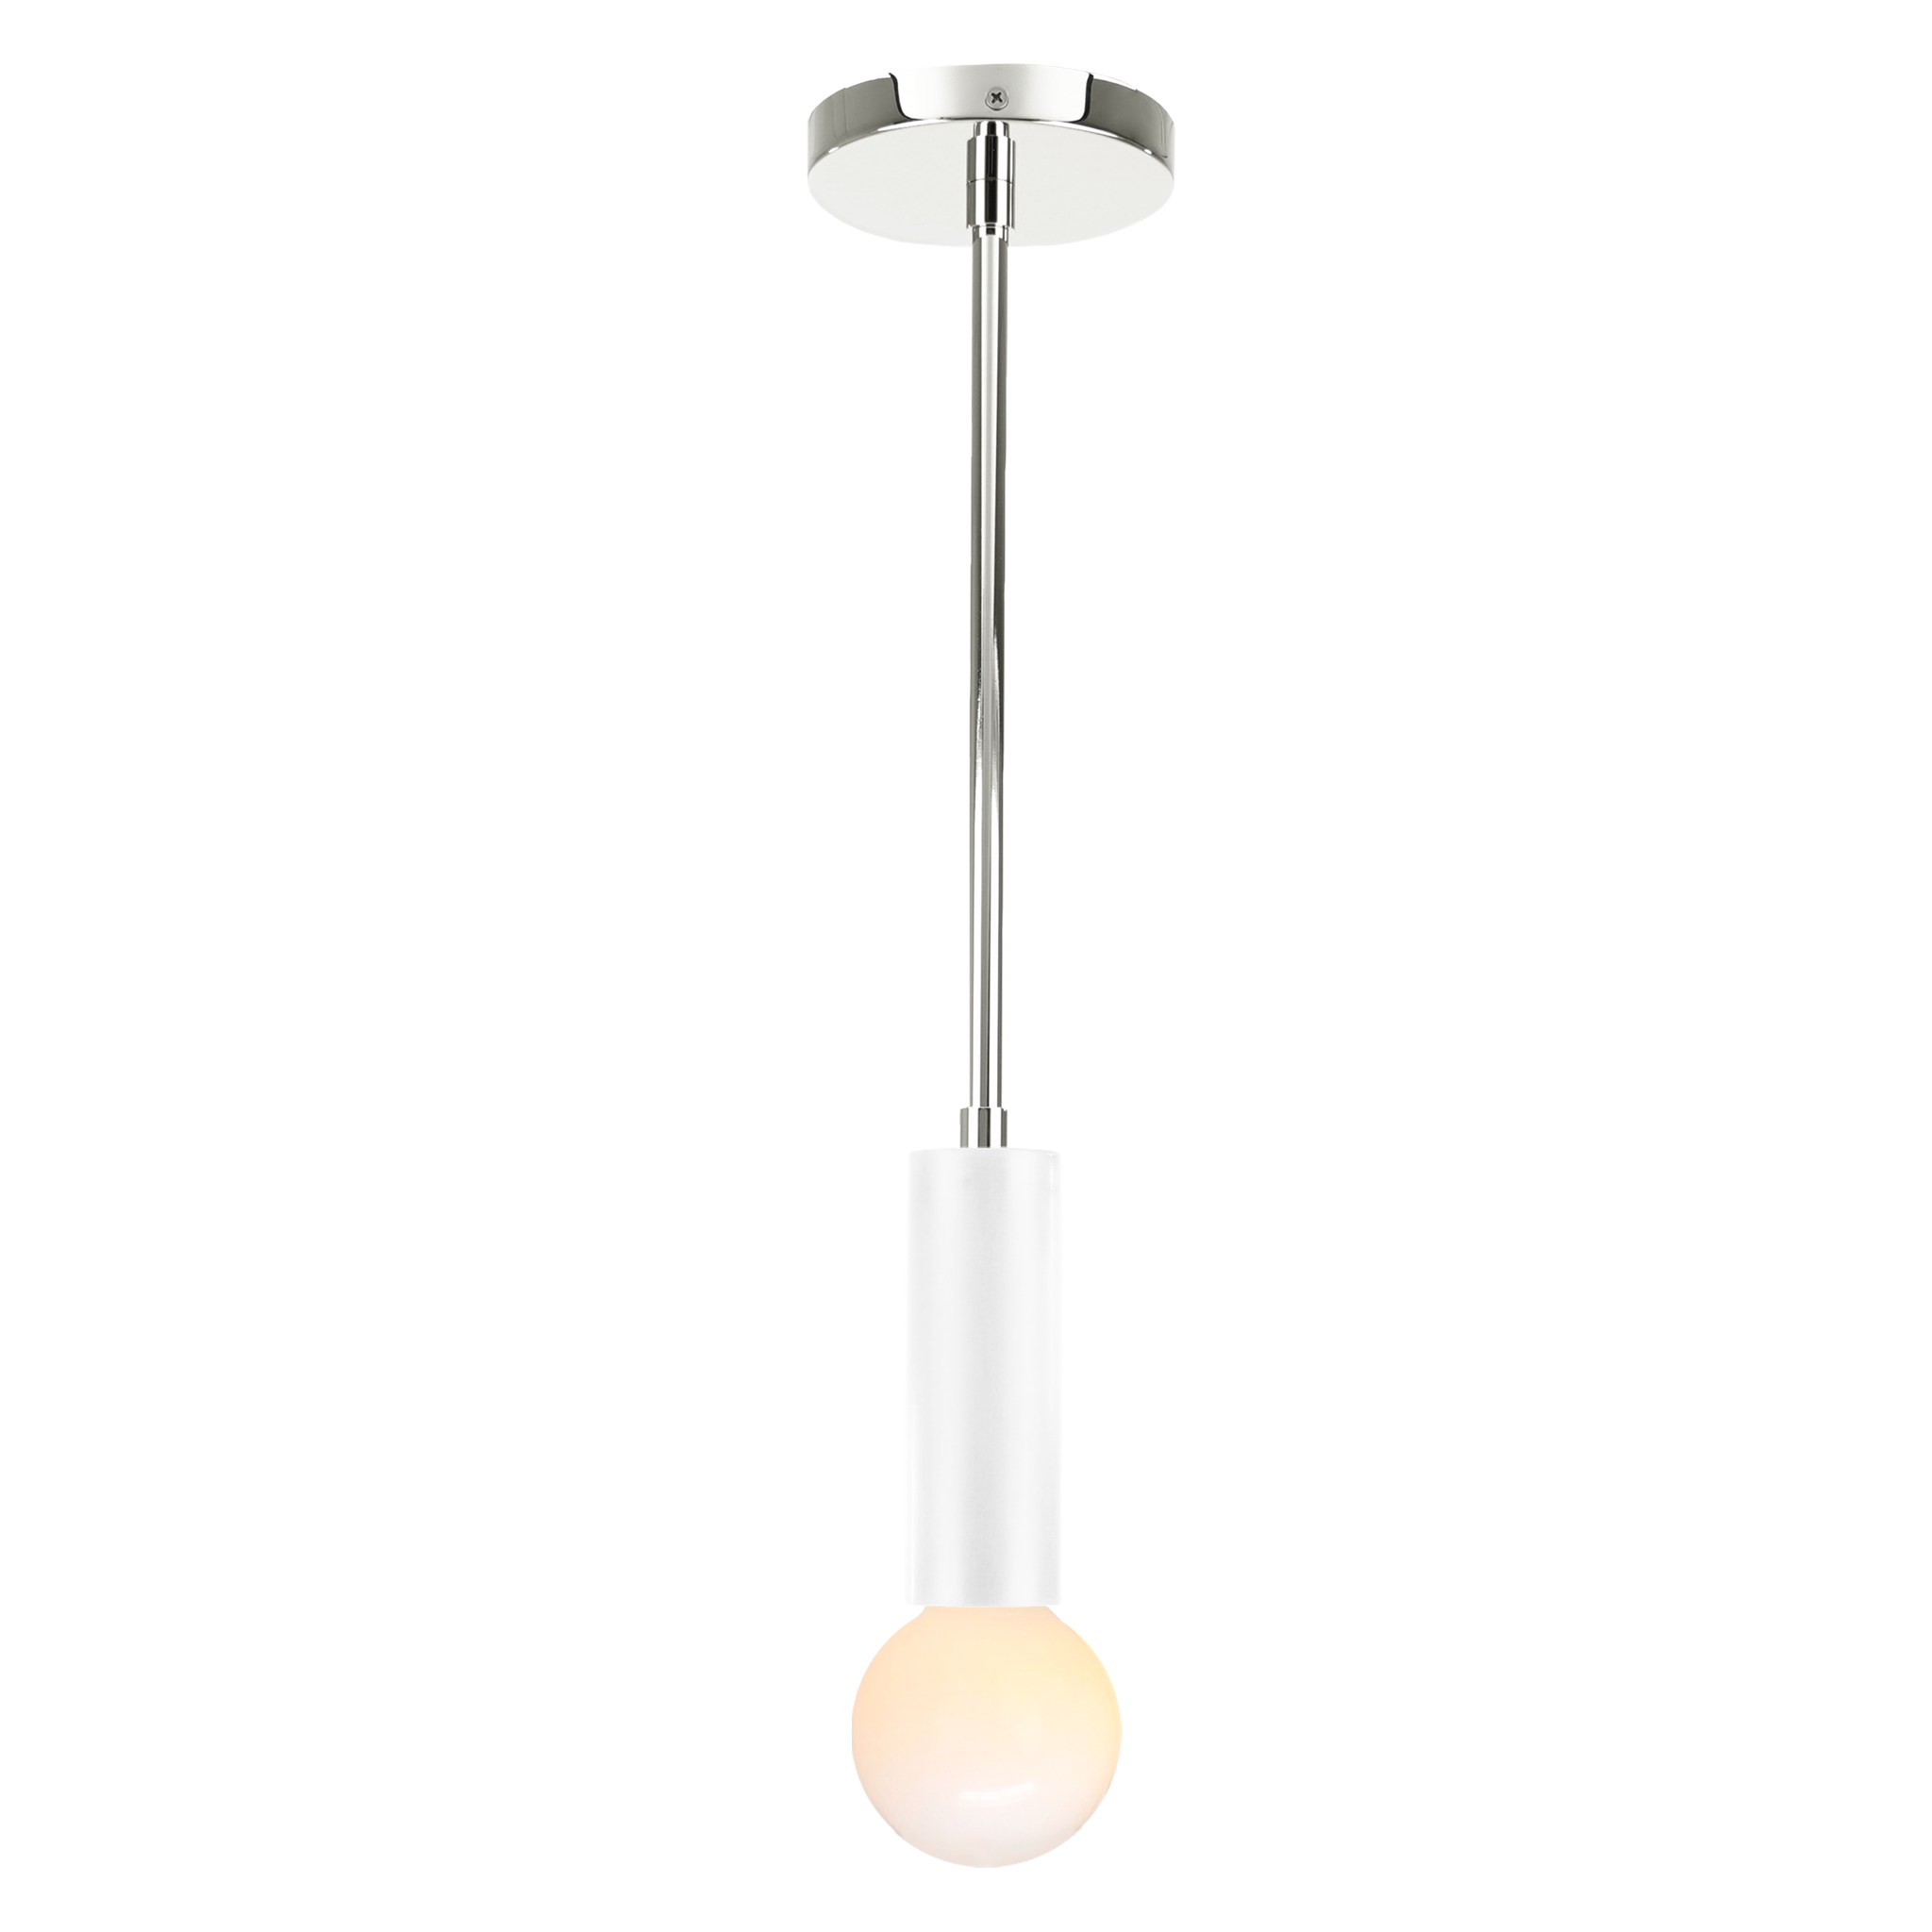 Nickel and white color Eureka pendant Dutton Brown lighting